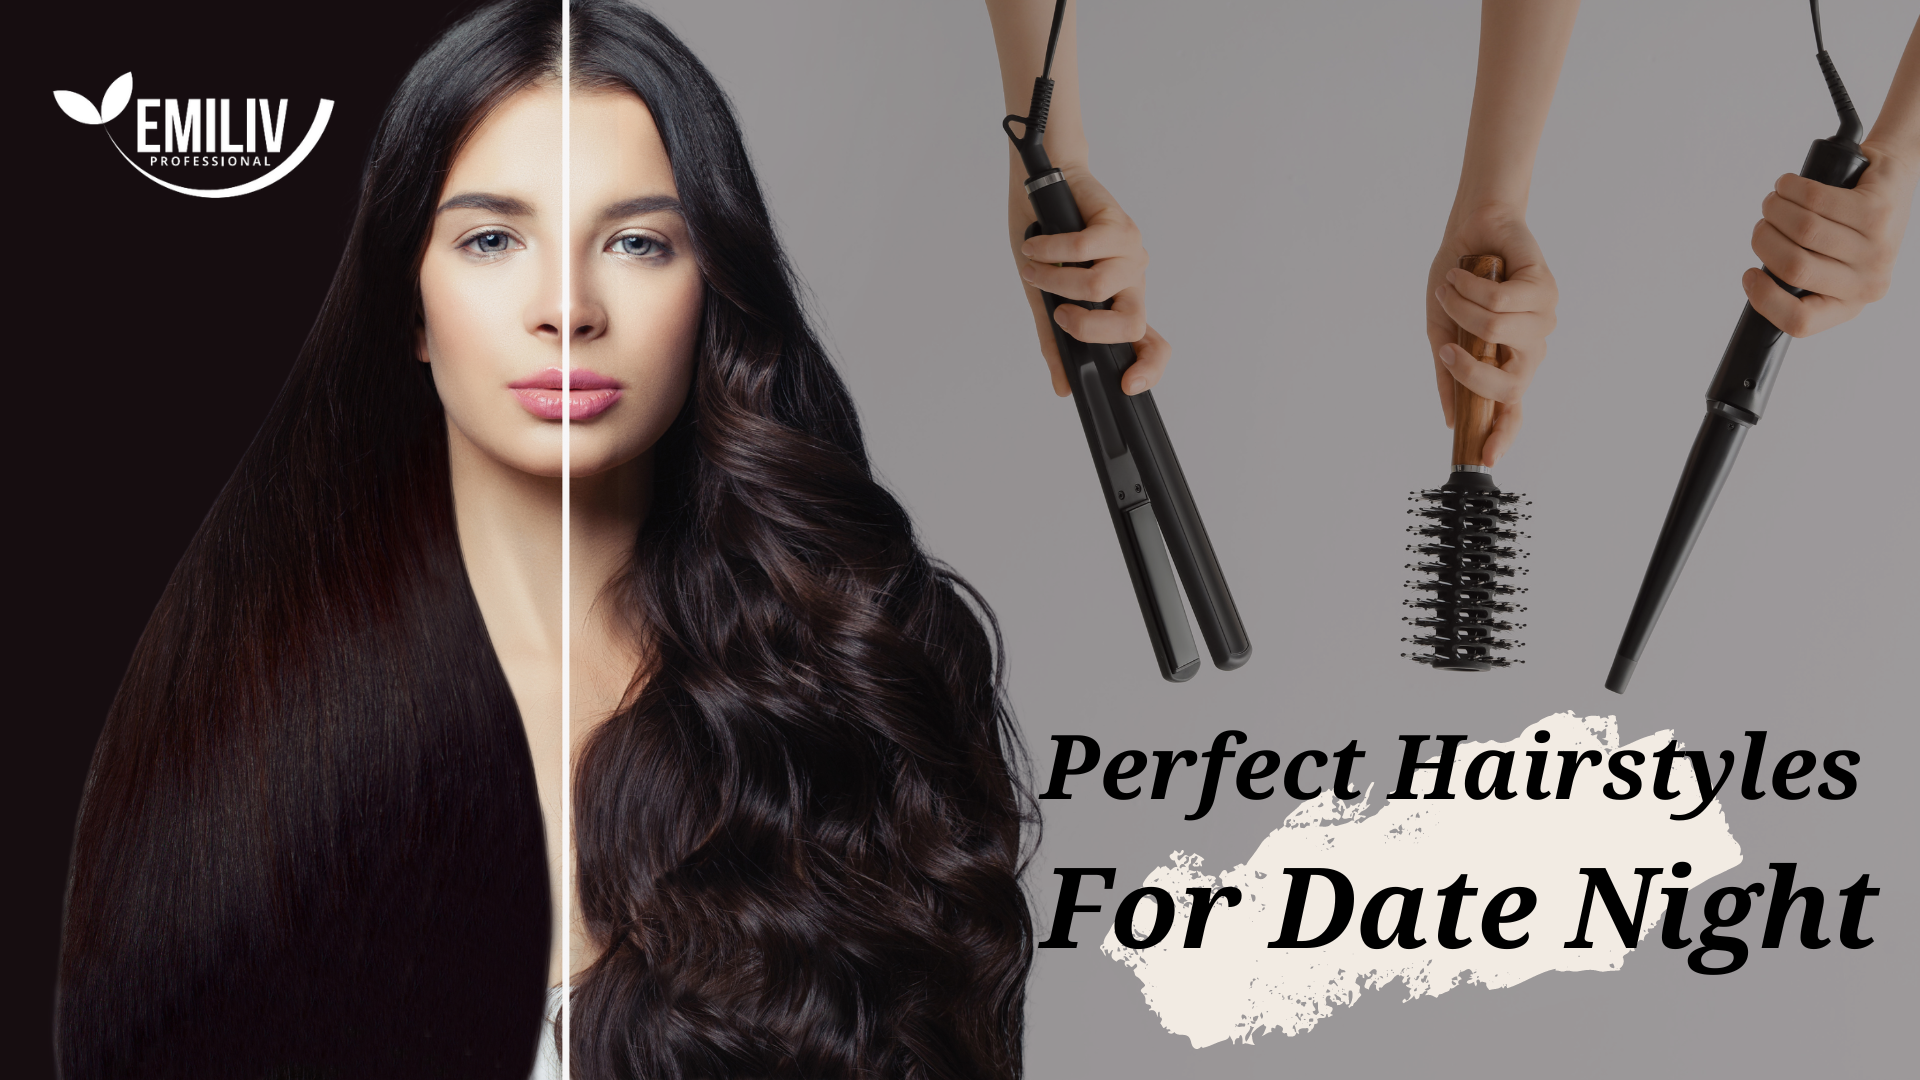 We Got You Covered: Your Guide To Date Night Hairstyles